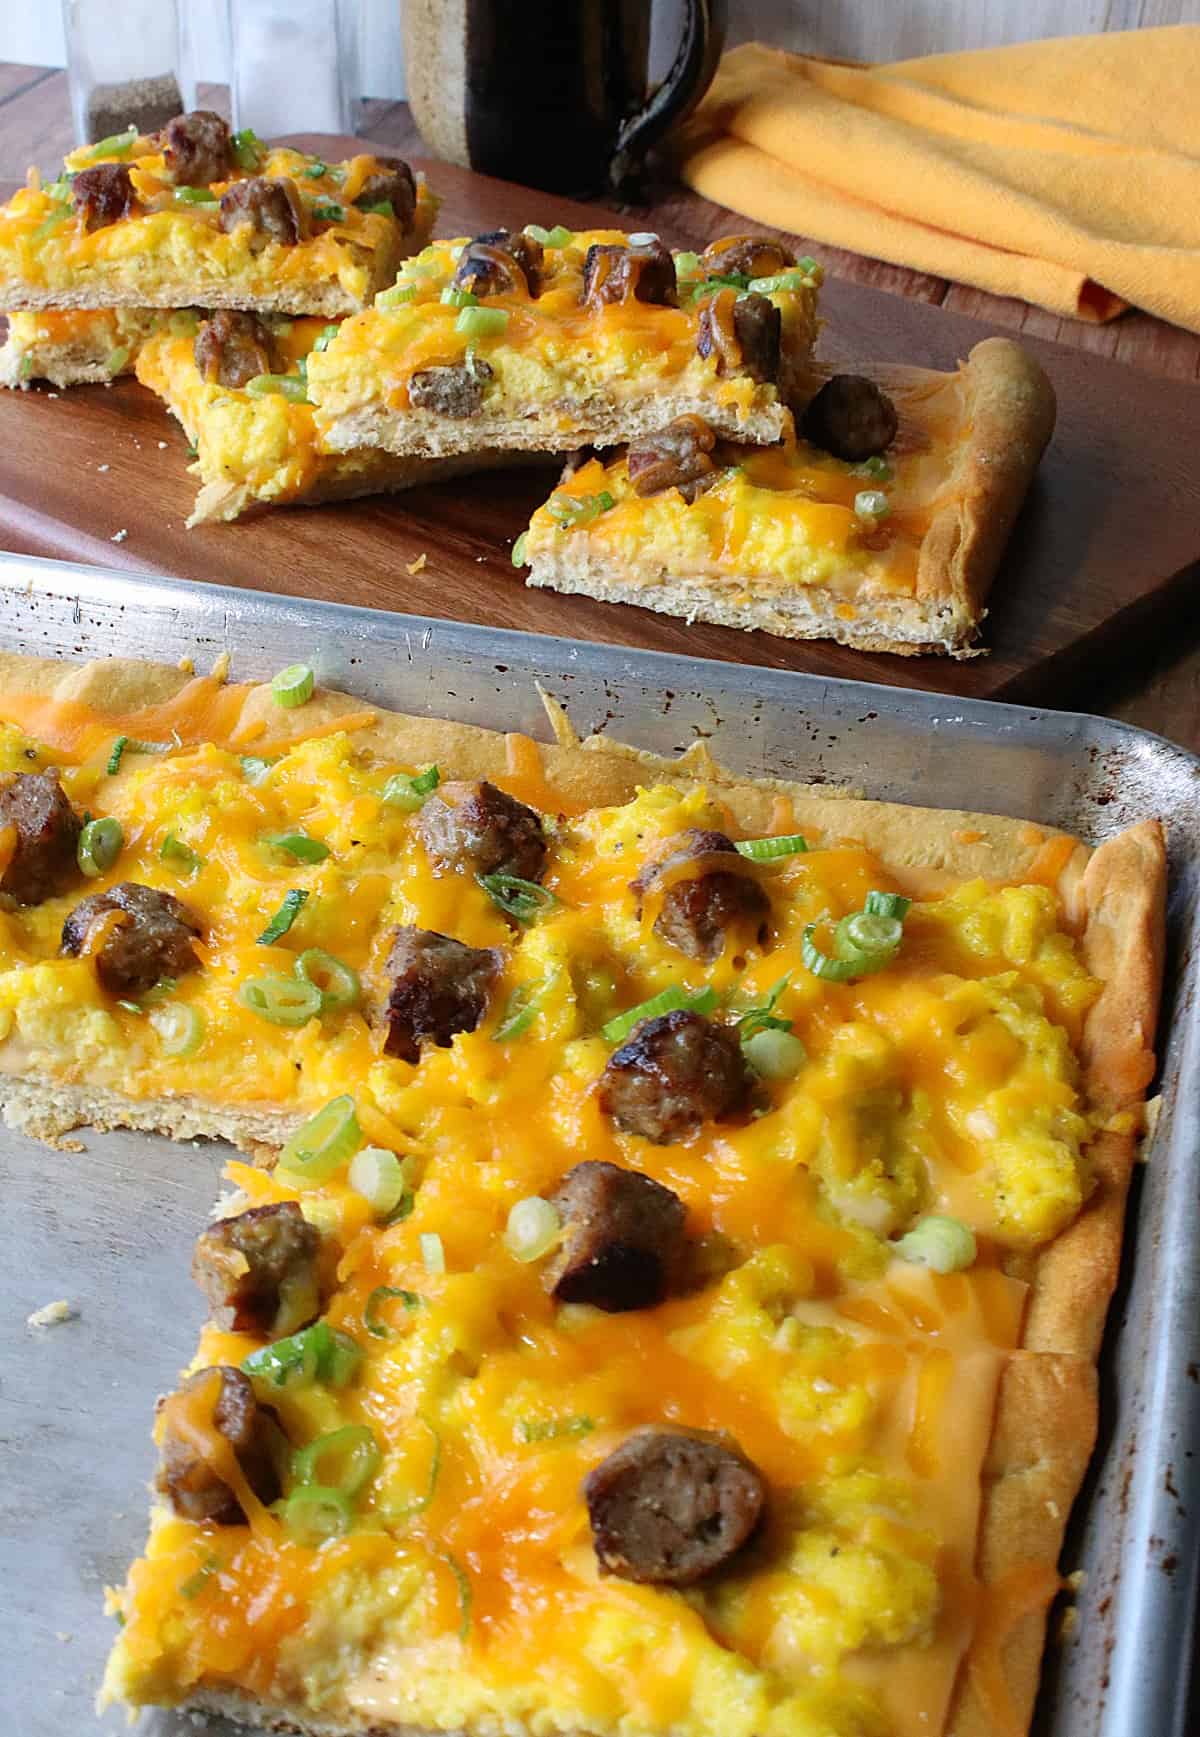 A cheesy Egg Pizza in a baking sheet with scallions and melted cheese.